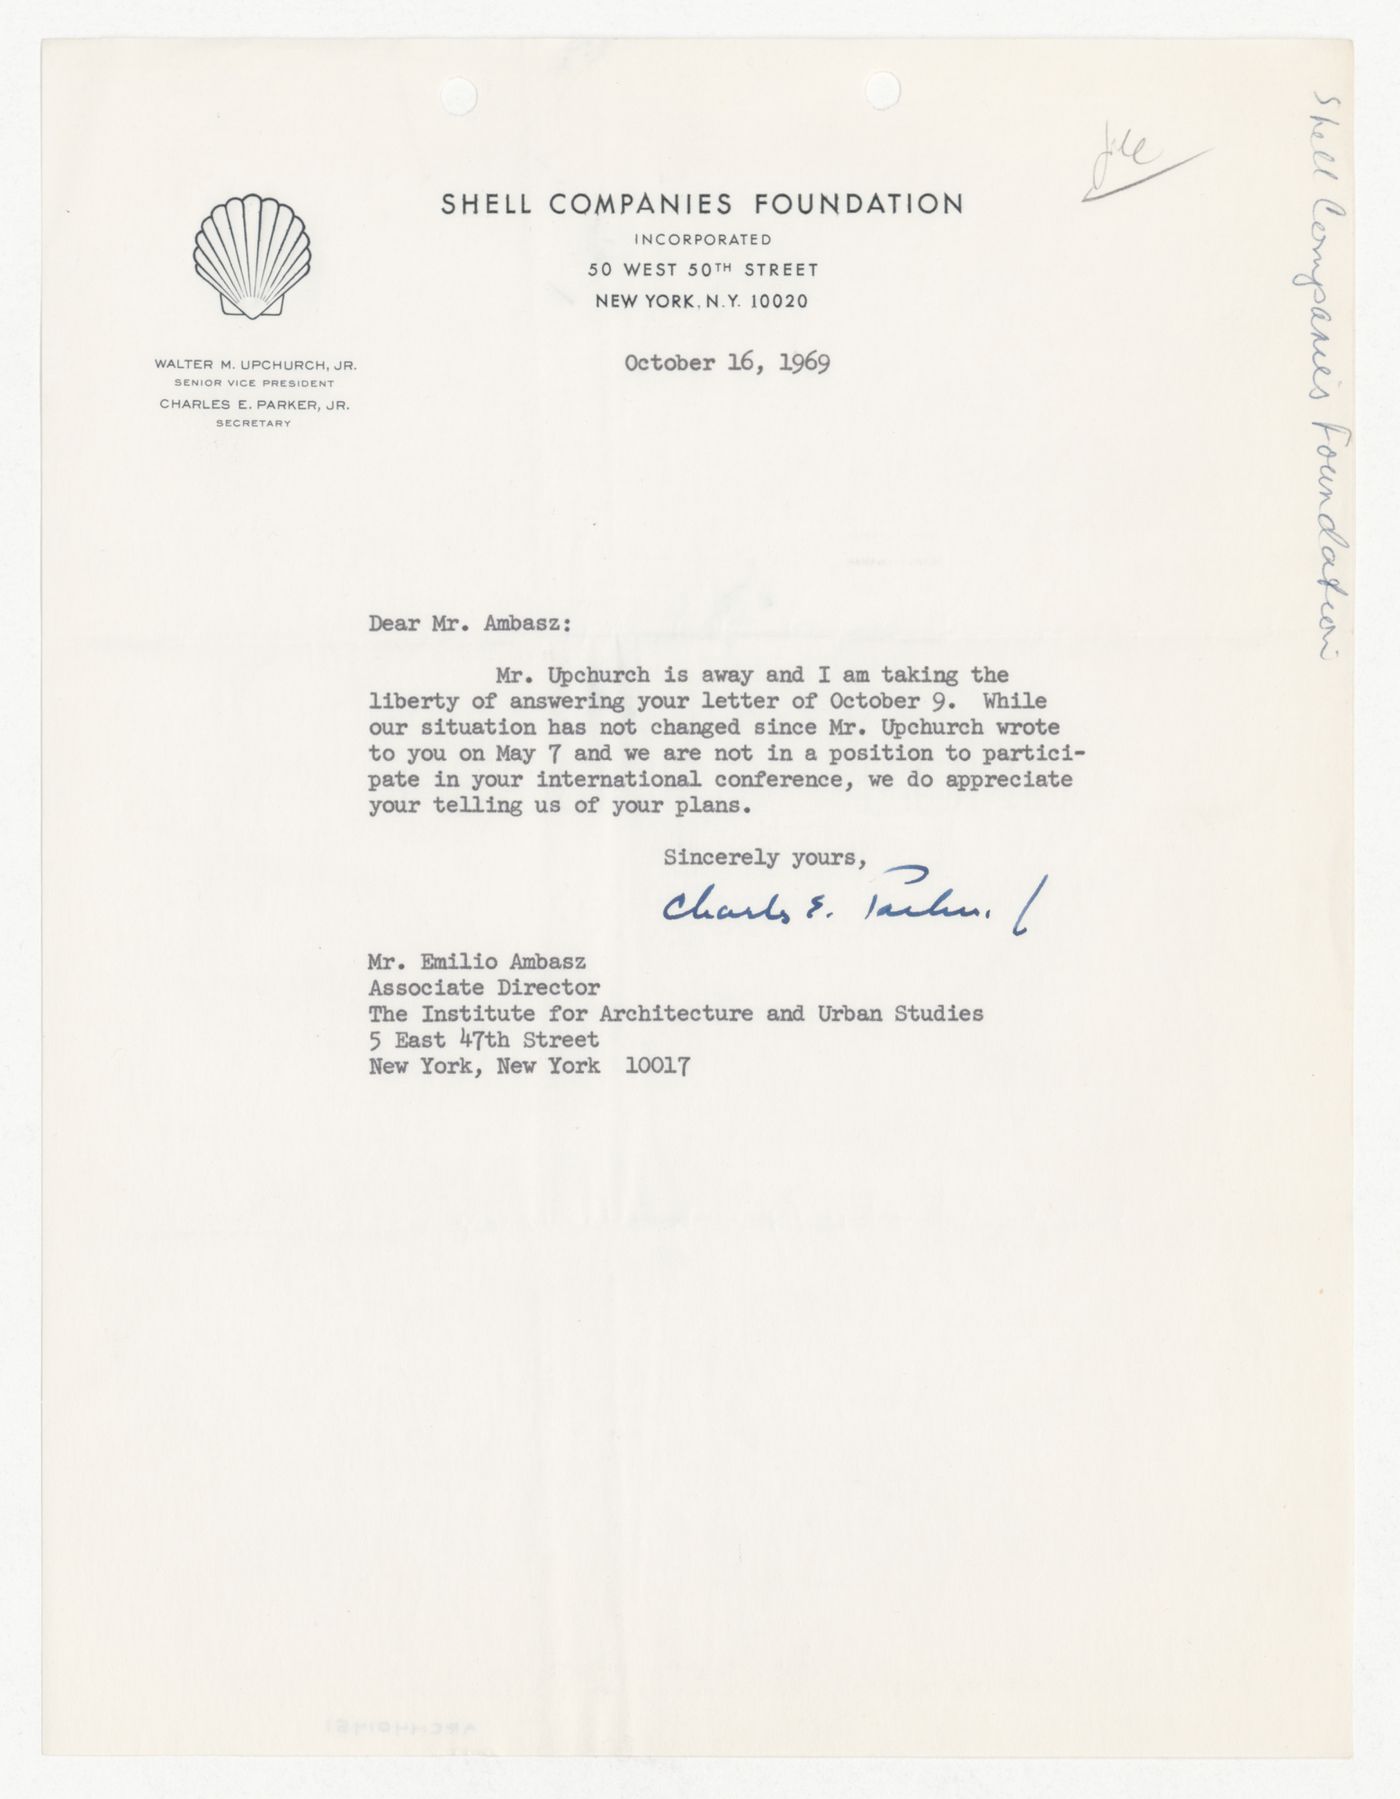 Letter from Charles E. Parker Jr. to Emilio Ambasz responding to proposal for Institutions for a Post-Technological Society conference